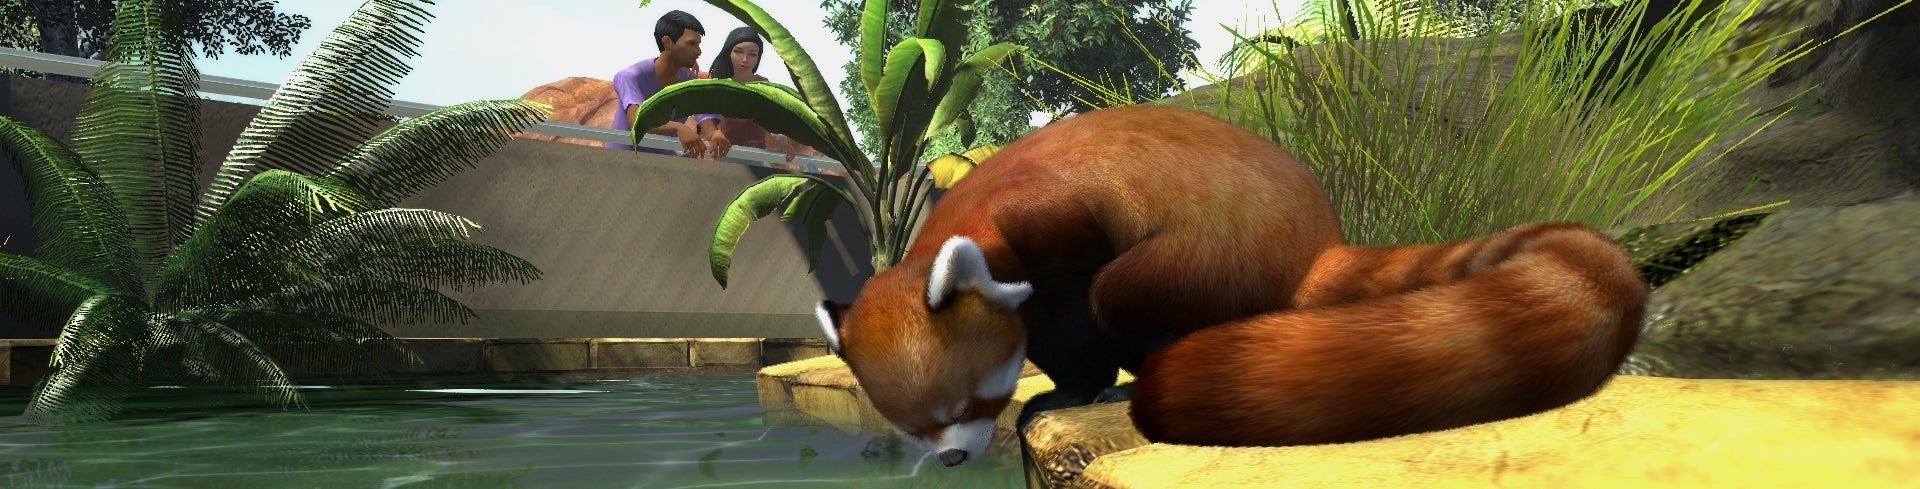 Image for Zoo Tycoon review